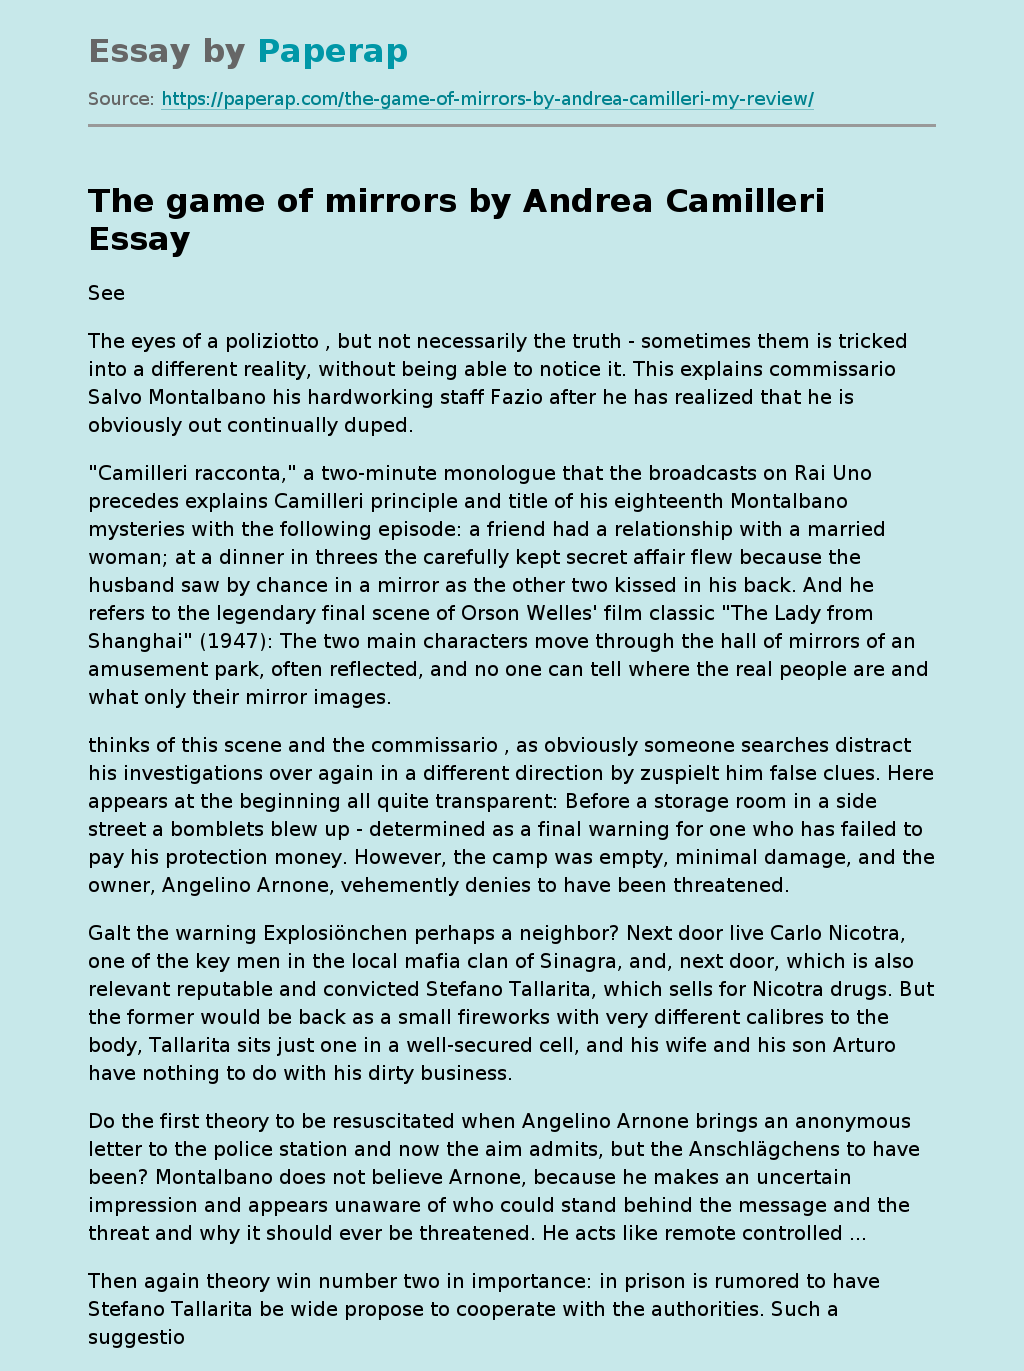 The game of mirrors by Andrea Camilleri